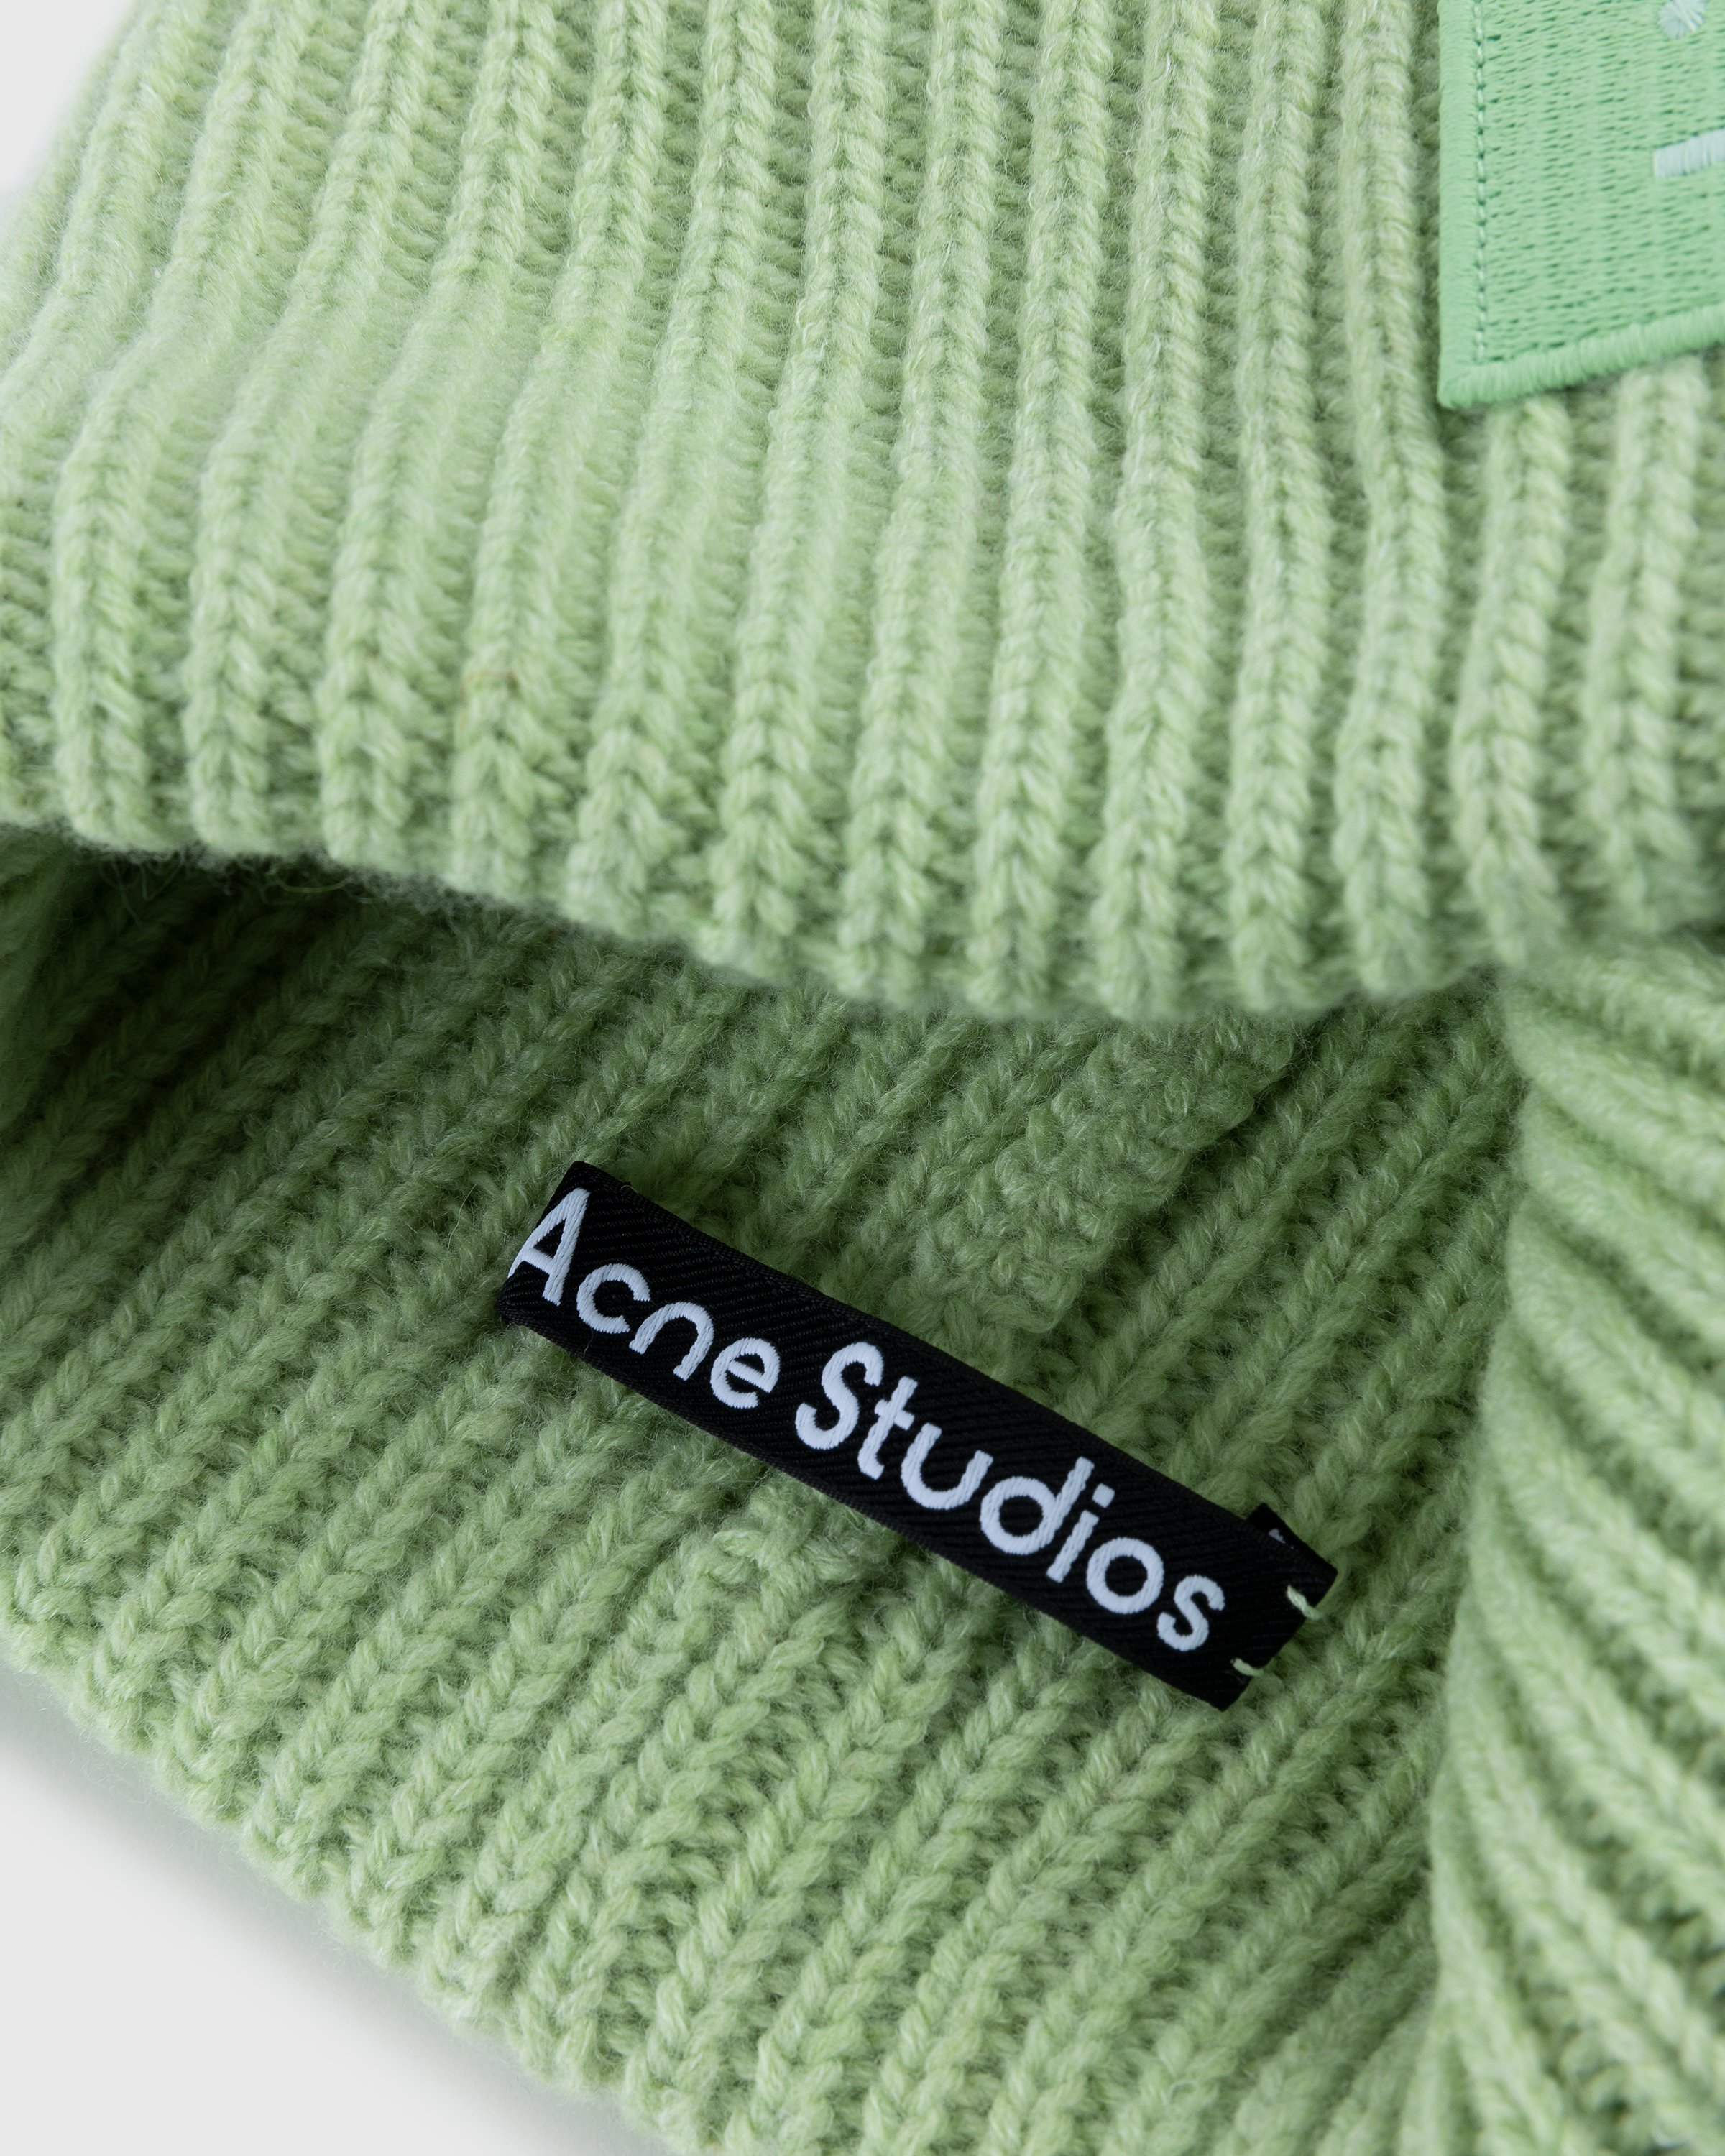 Acne Studios - Knit Face Patch Beanie Pale Green - Accessories - Green - Image 4